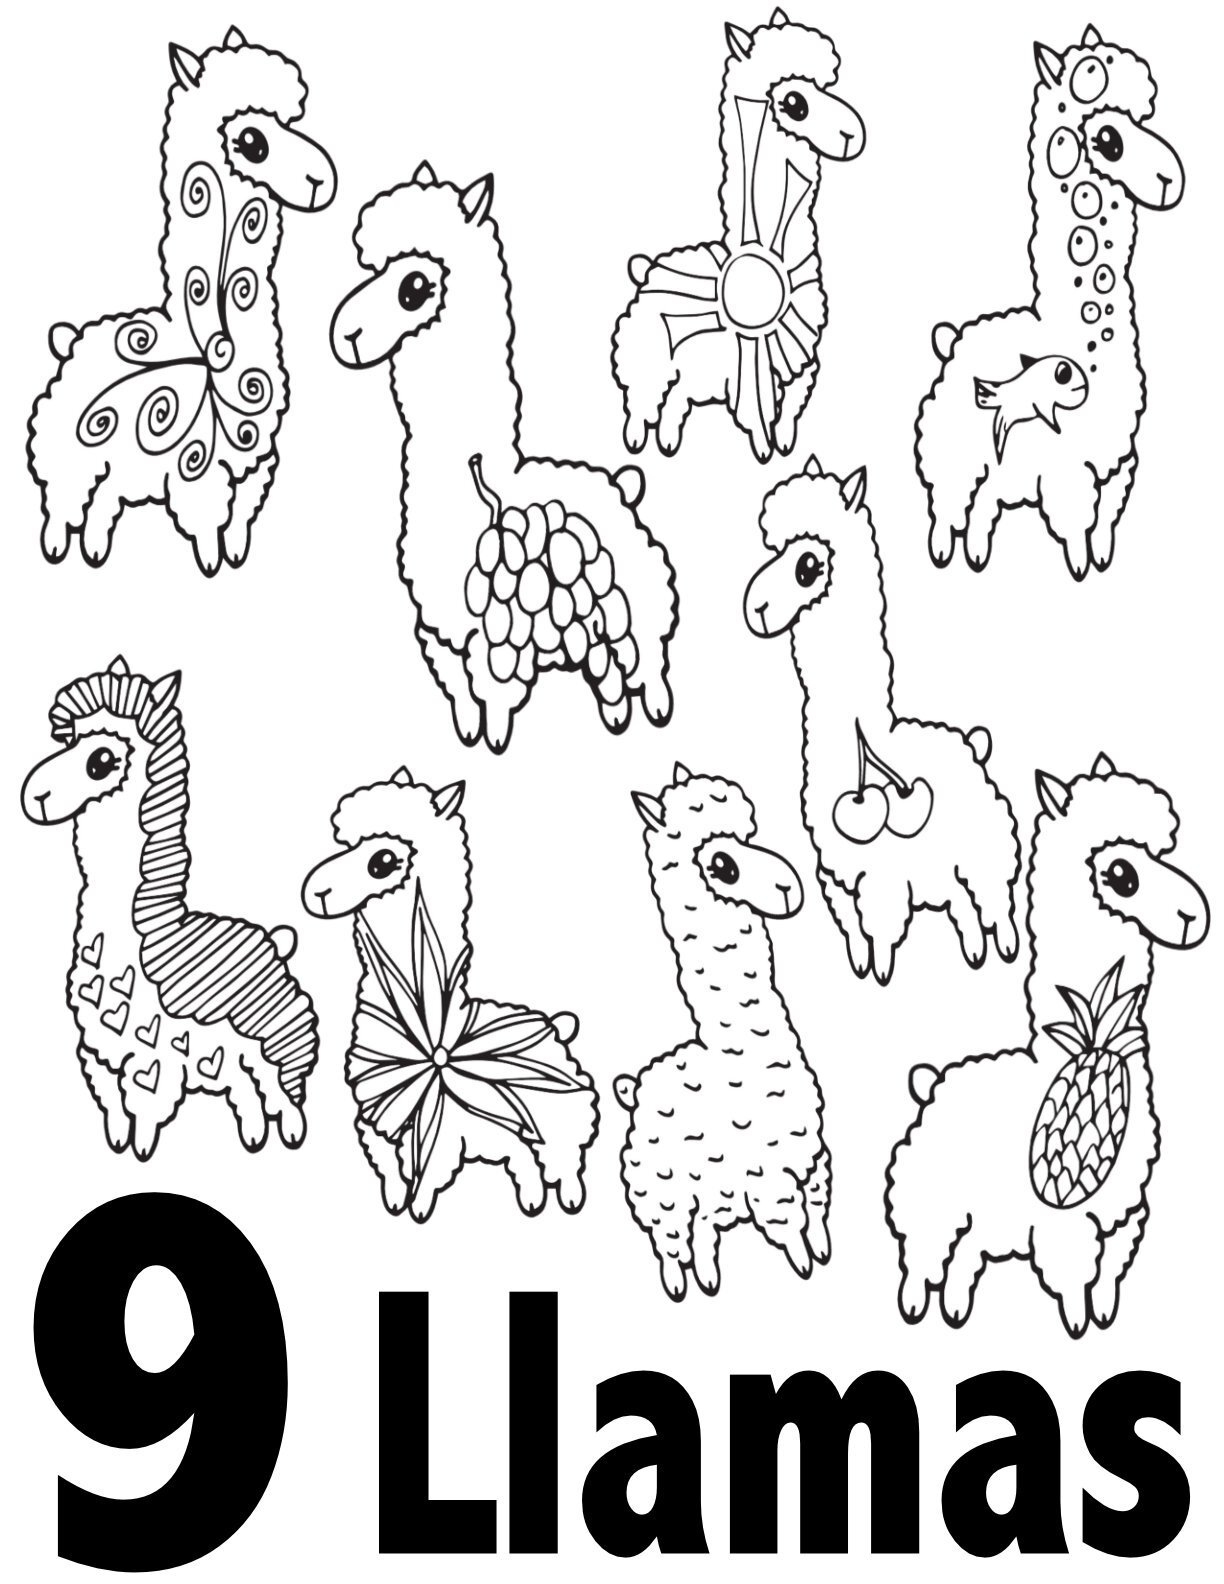 Llama Number Coloring Pages Collection 1-10 - Free Preschool/Kindergarten Printable - Number 9CLICK TO DOWNLOAD THE 9 LLAMA PAGE ONLY